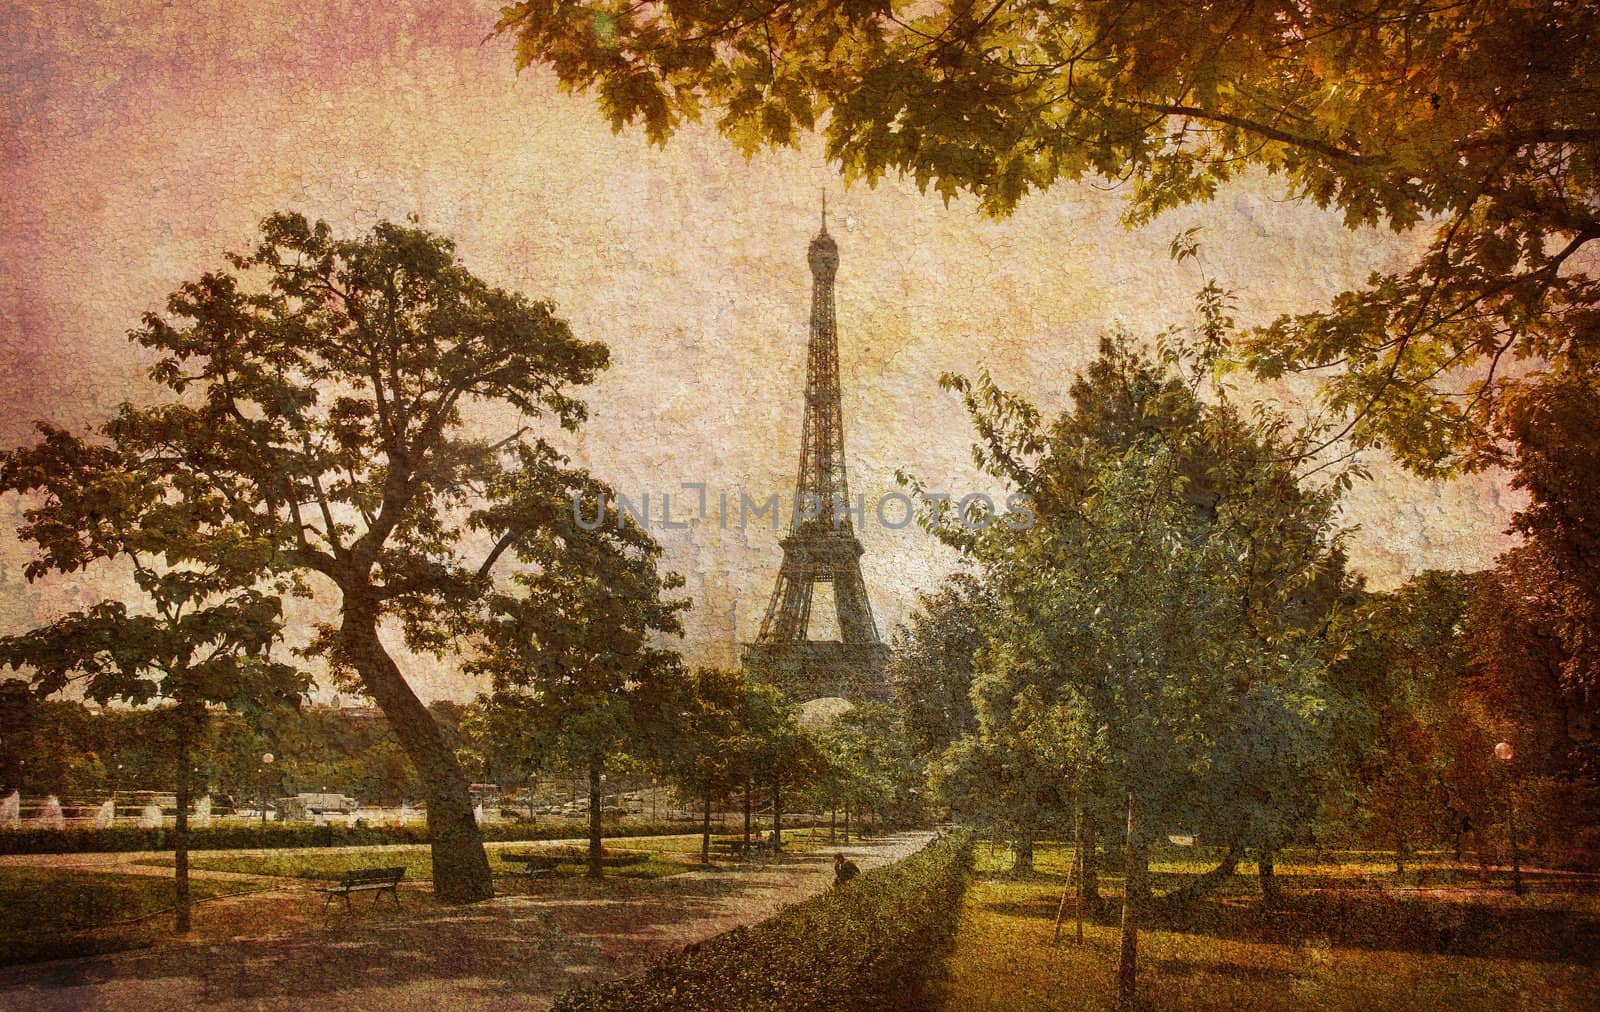 Like an old Japanese print. Several of my photos worked together to make a dreamlike retro look. Dream of the Eiffel tower.